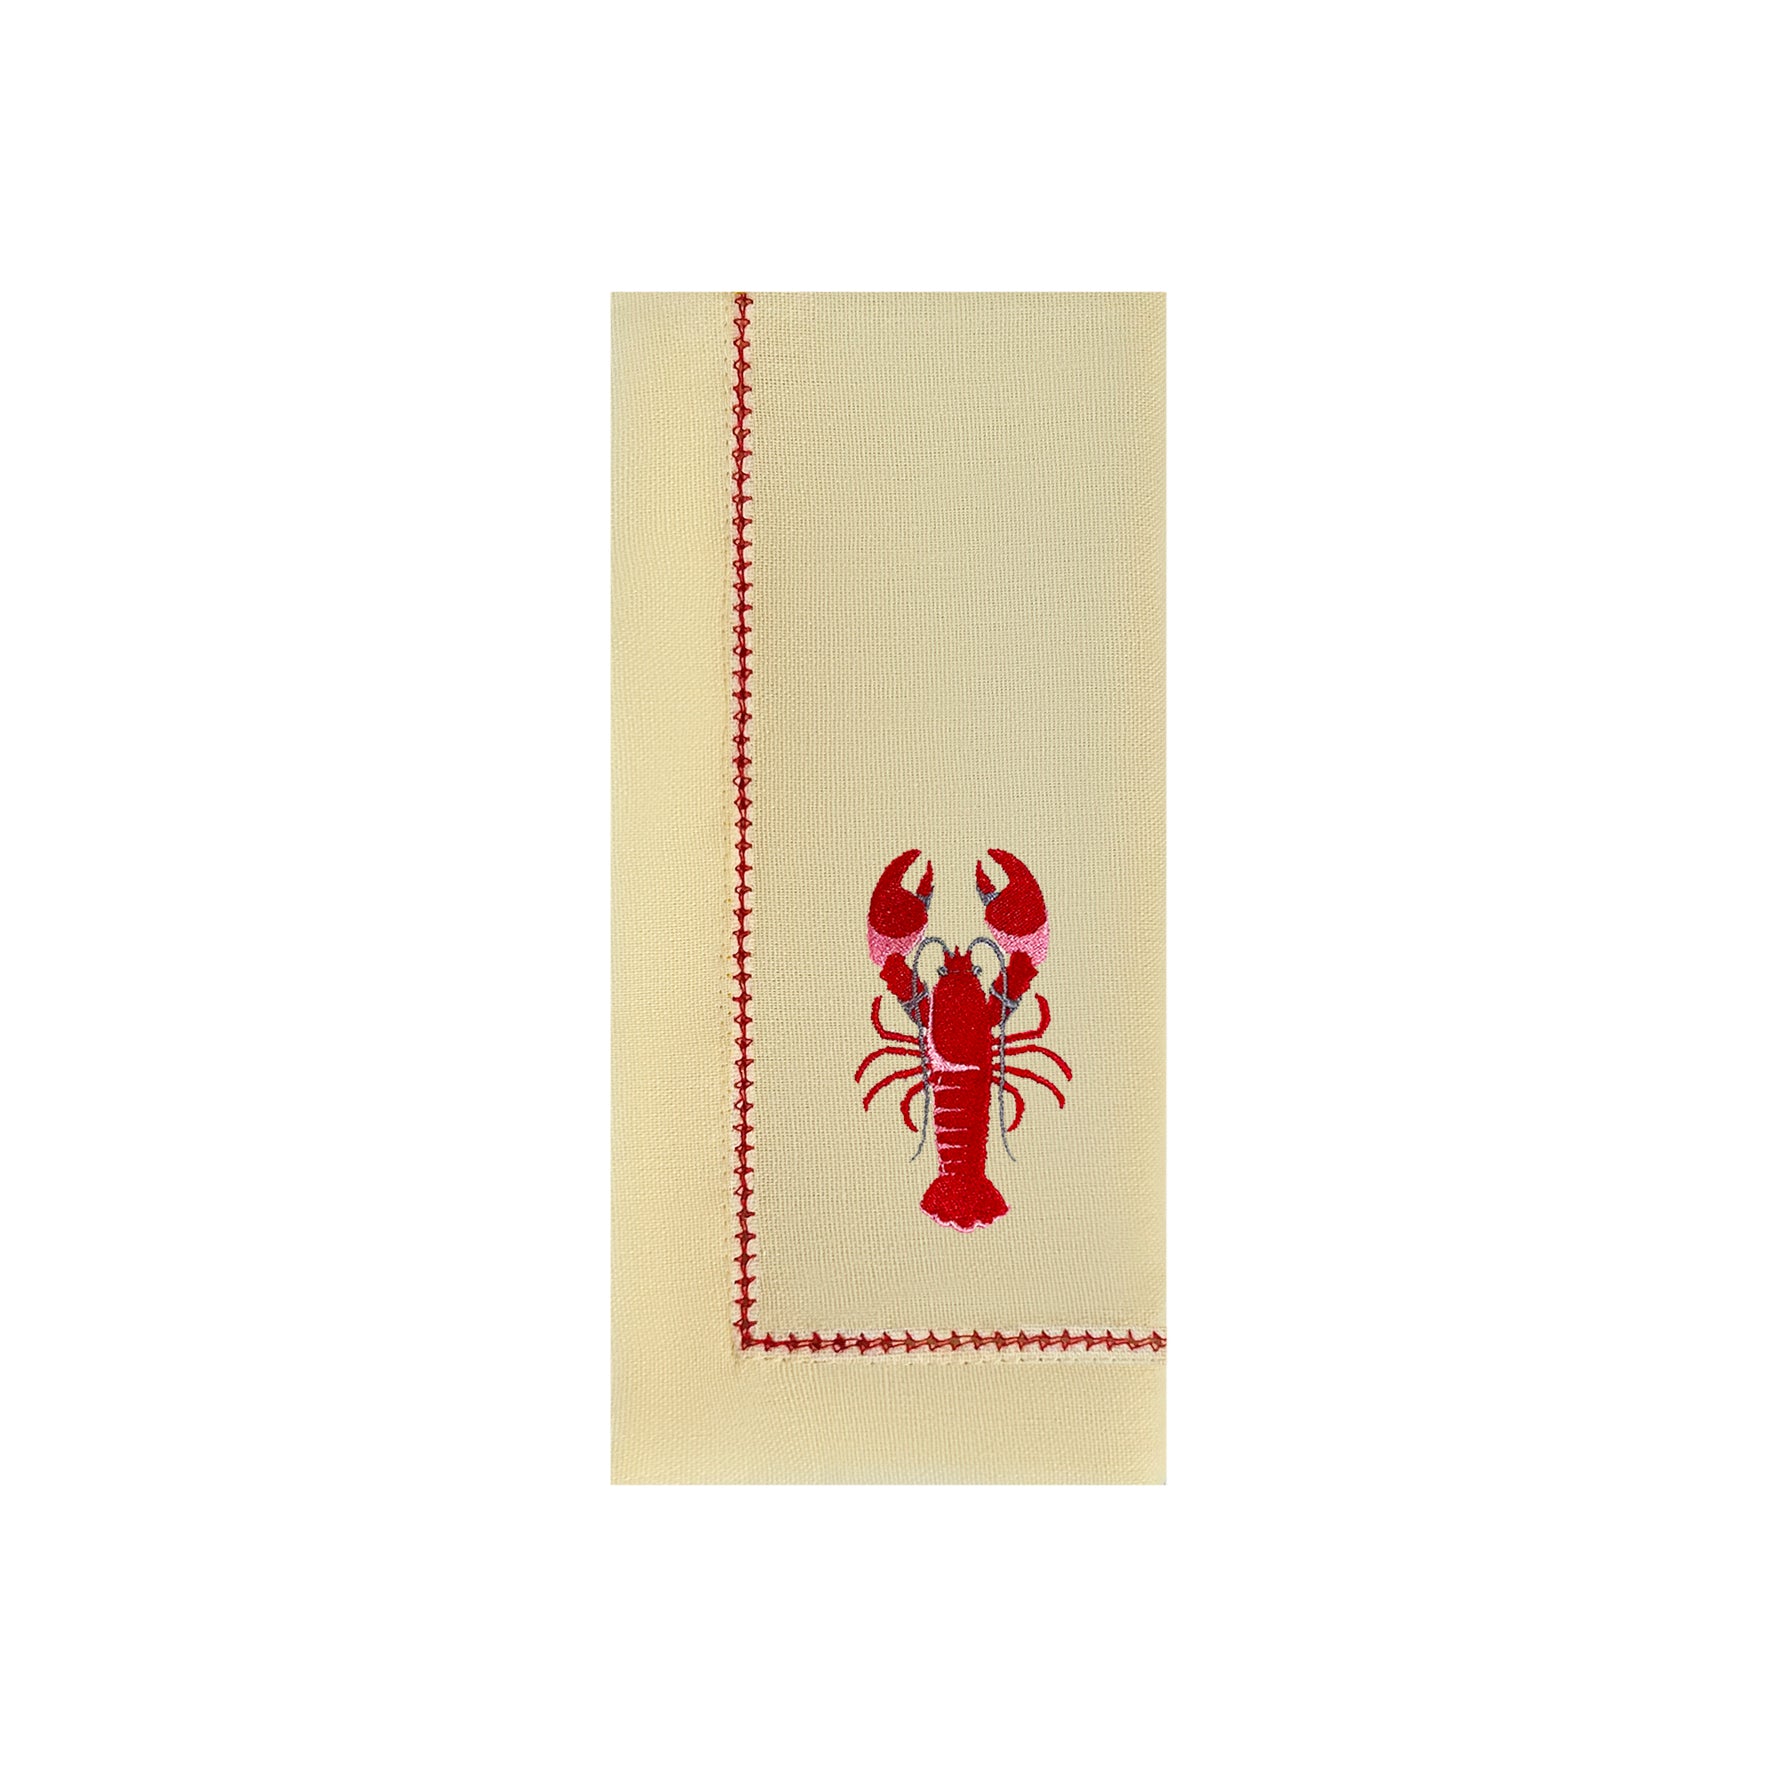 Embroidered Lobster Placemats | Set of 4